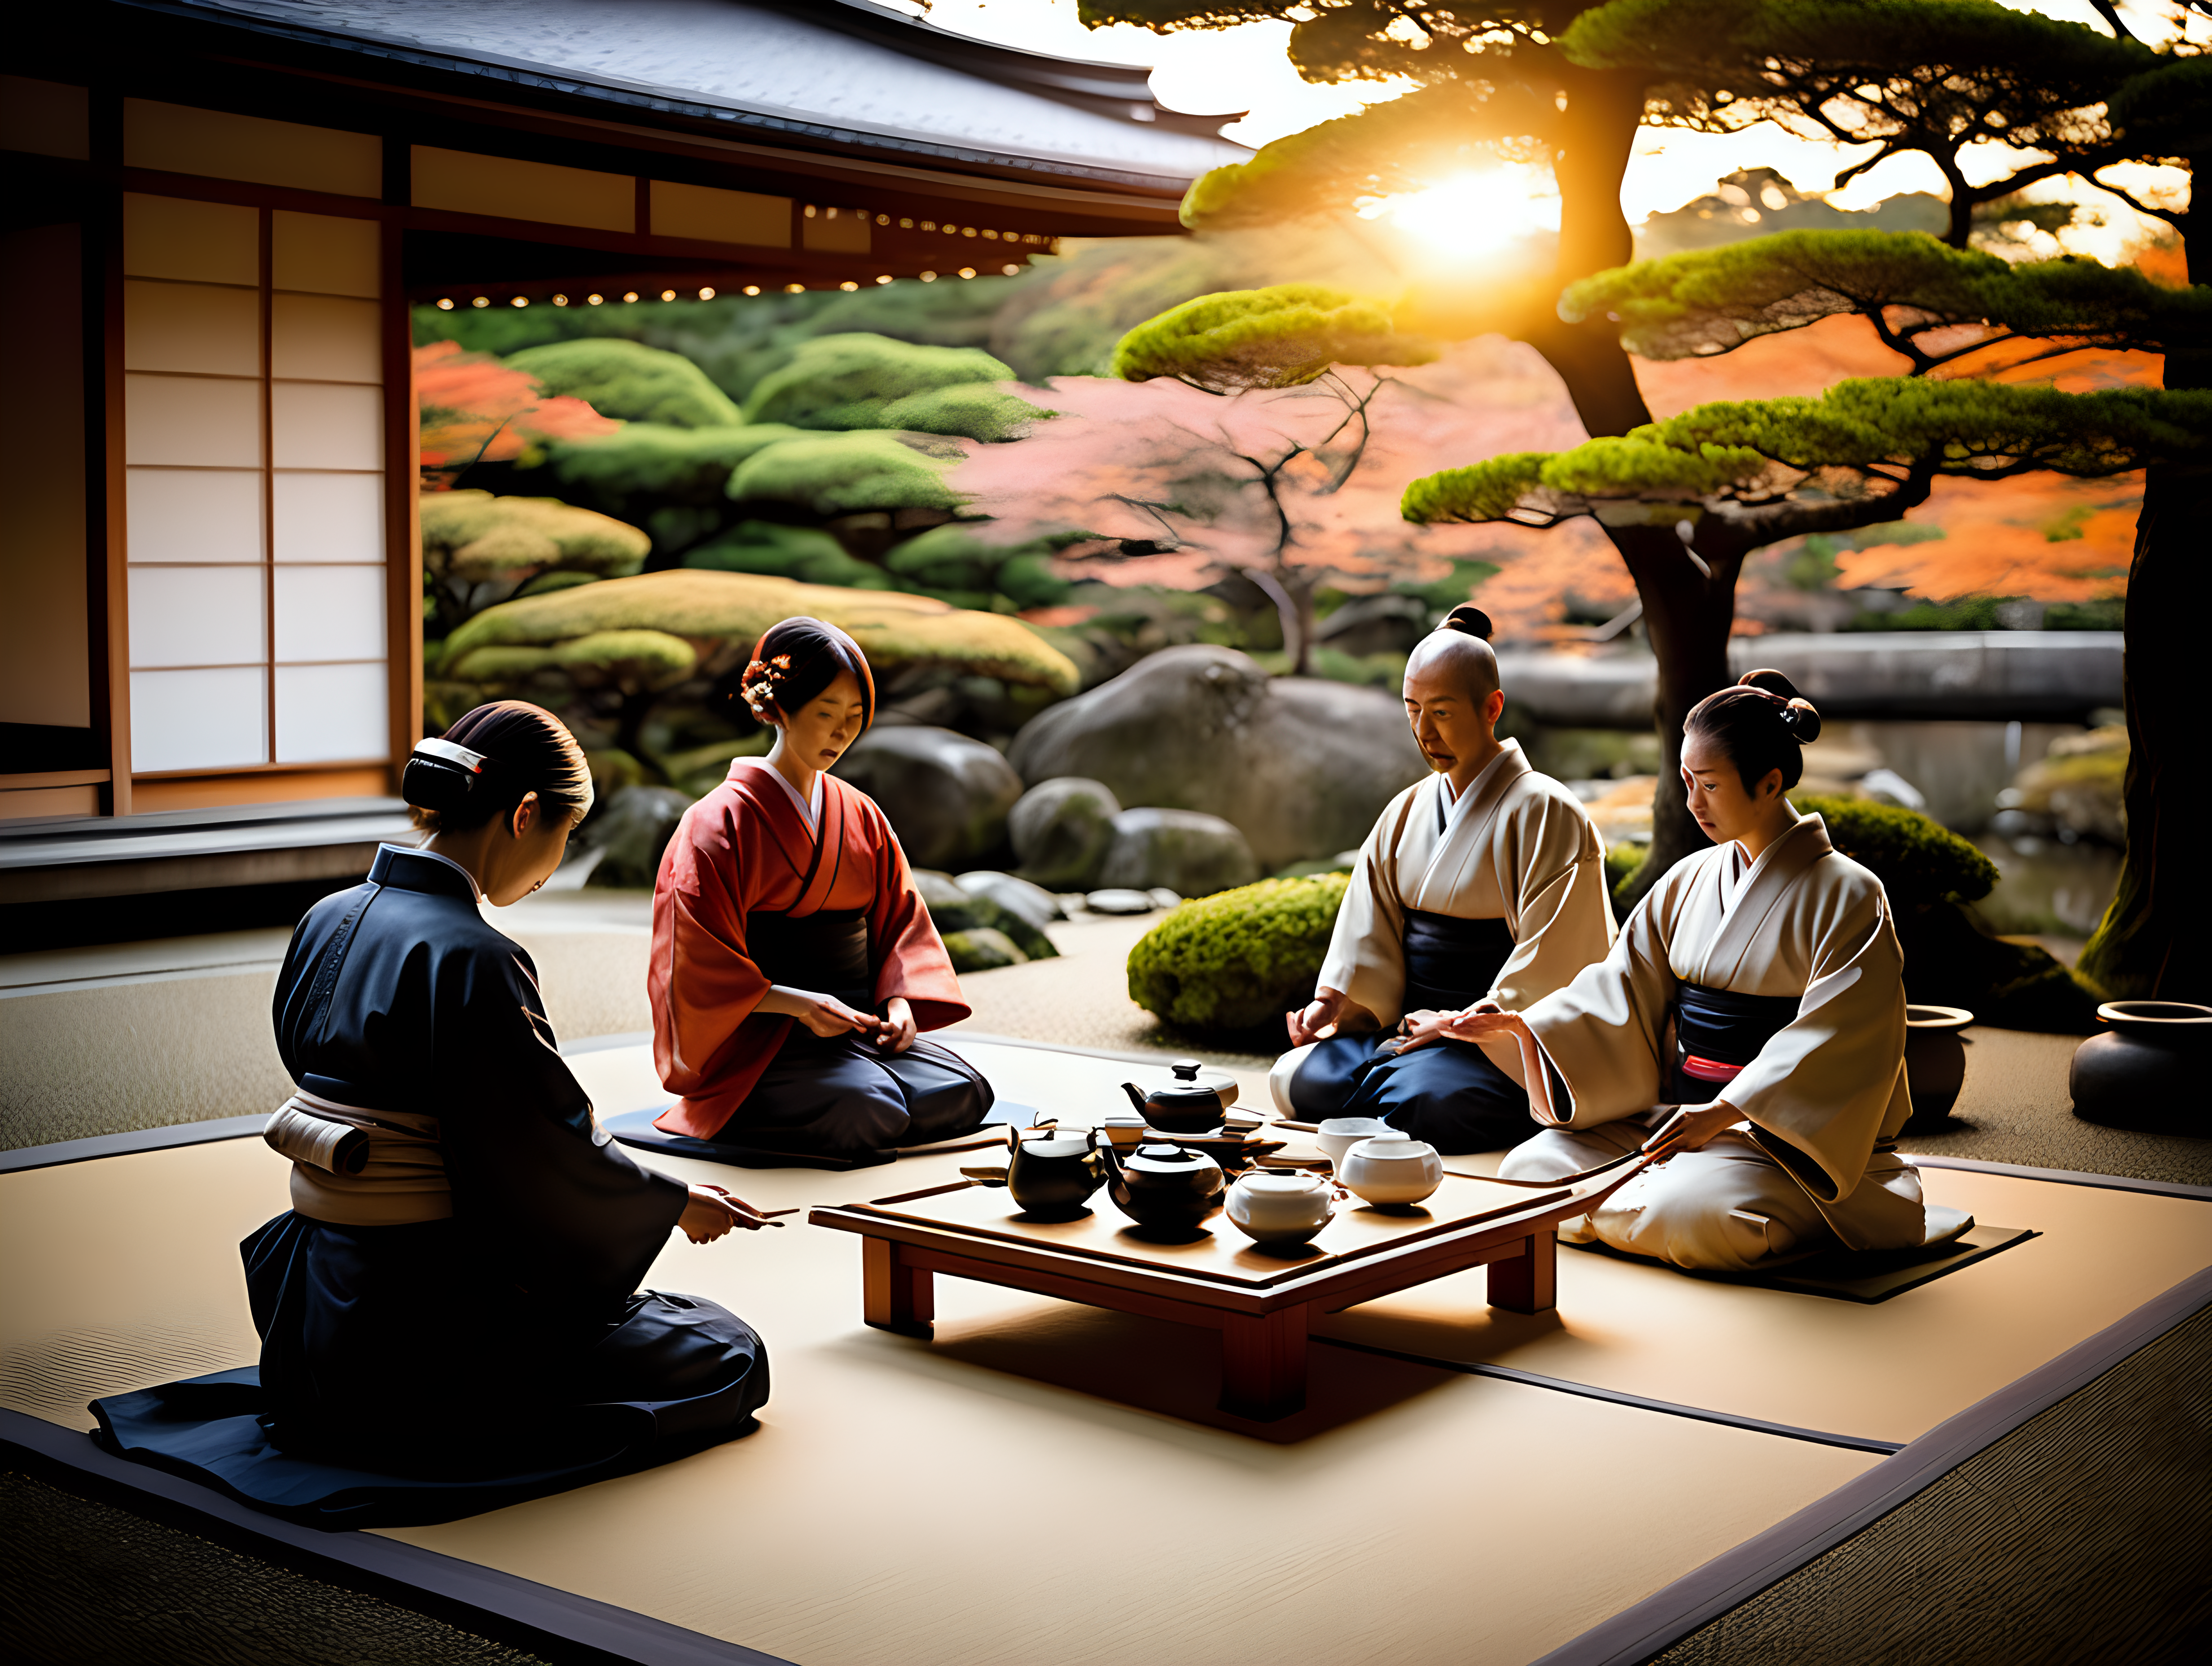 a tea ceremony with a tea master and 3 guests by the garden at Ryoanji Temple in Kyoto japan at sunset